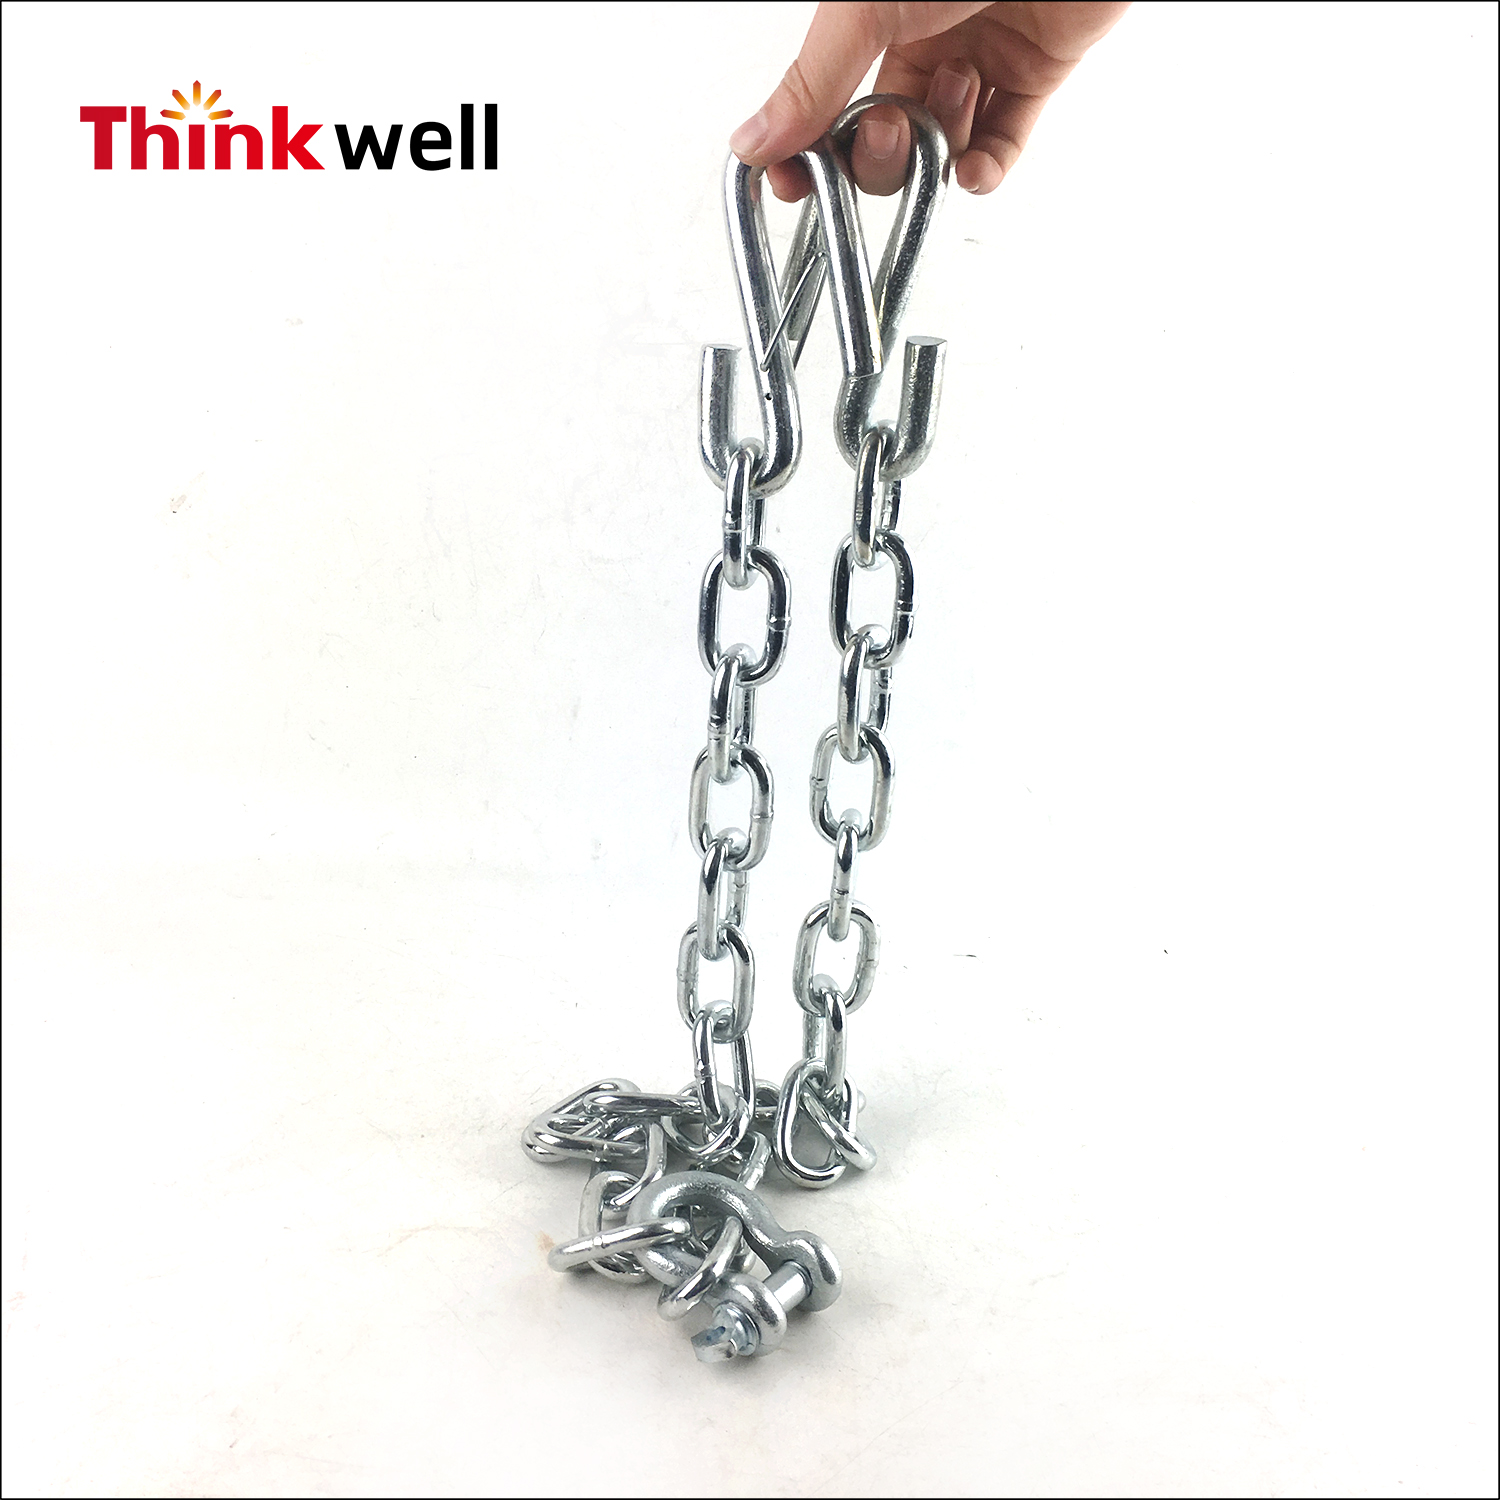  G30 Traielr Safety Chain with S hook